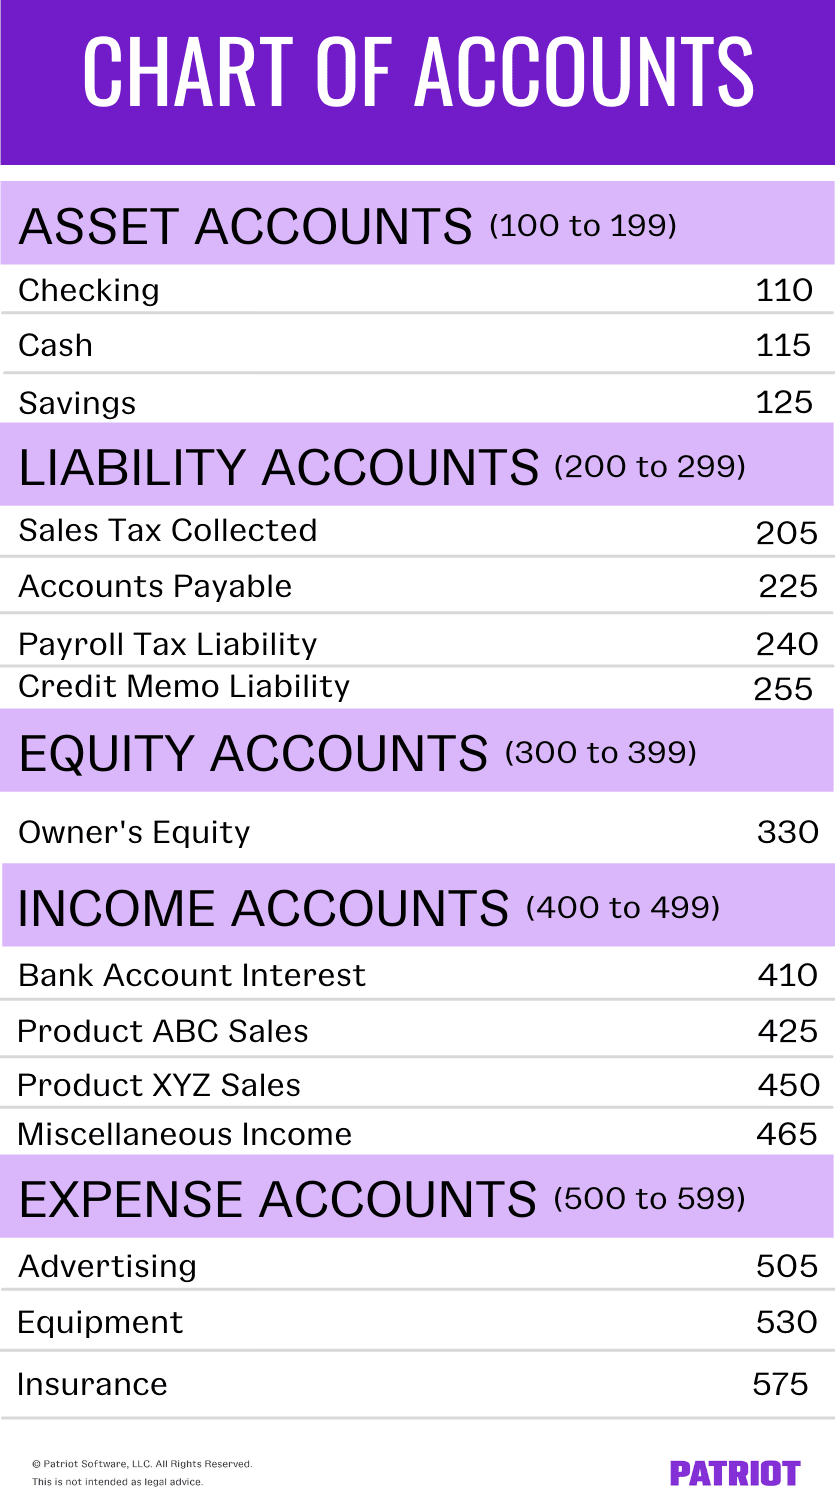 Chart of accounts example 